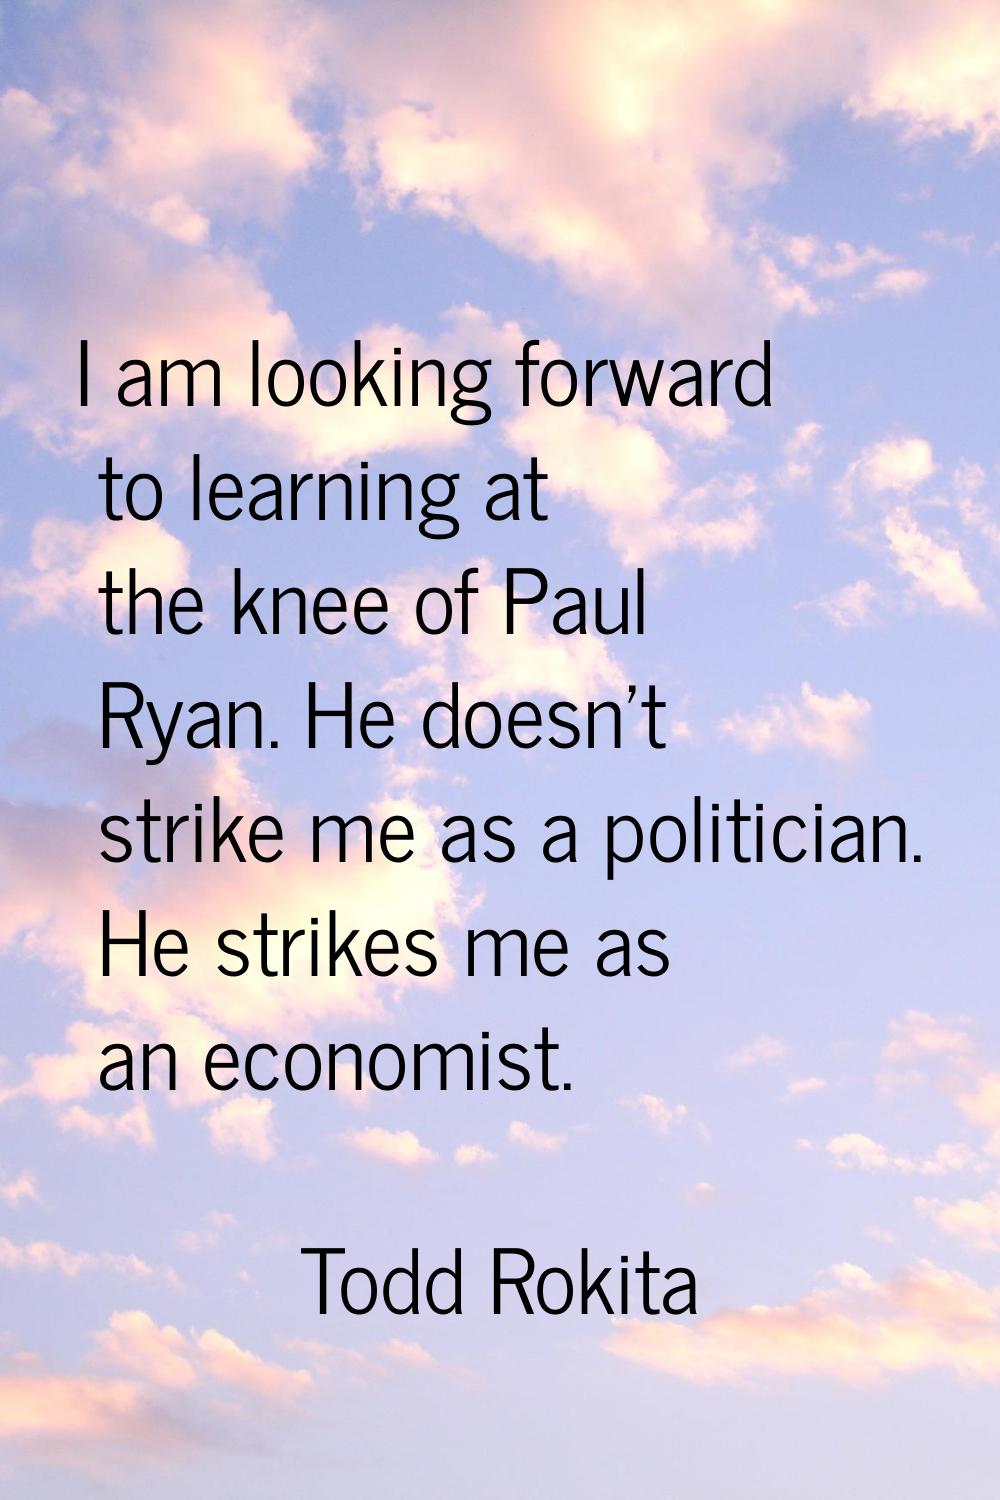 I am looking forward to learning at the knee of Paul Ryan. He doesn't strike me as a politician. He